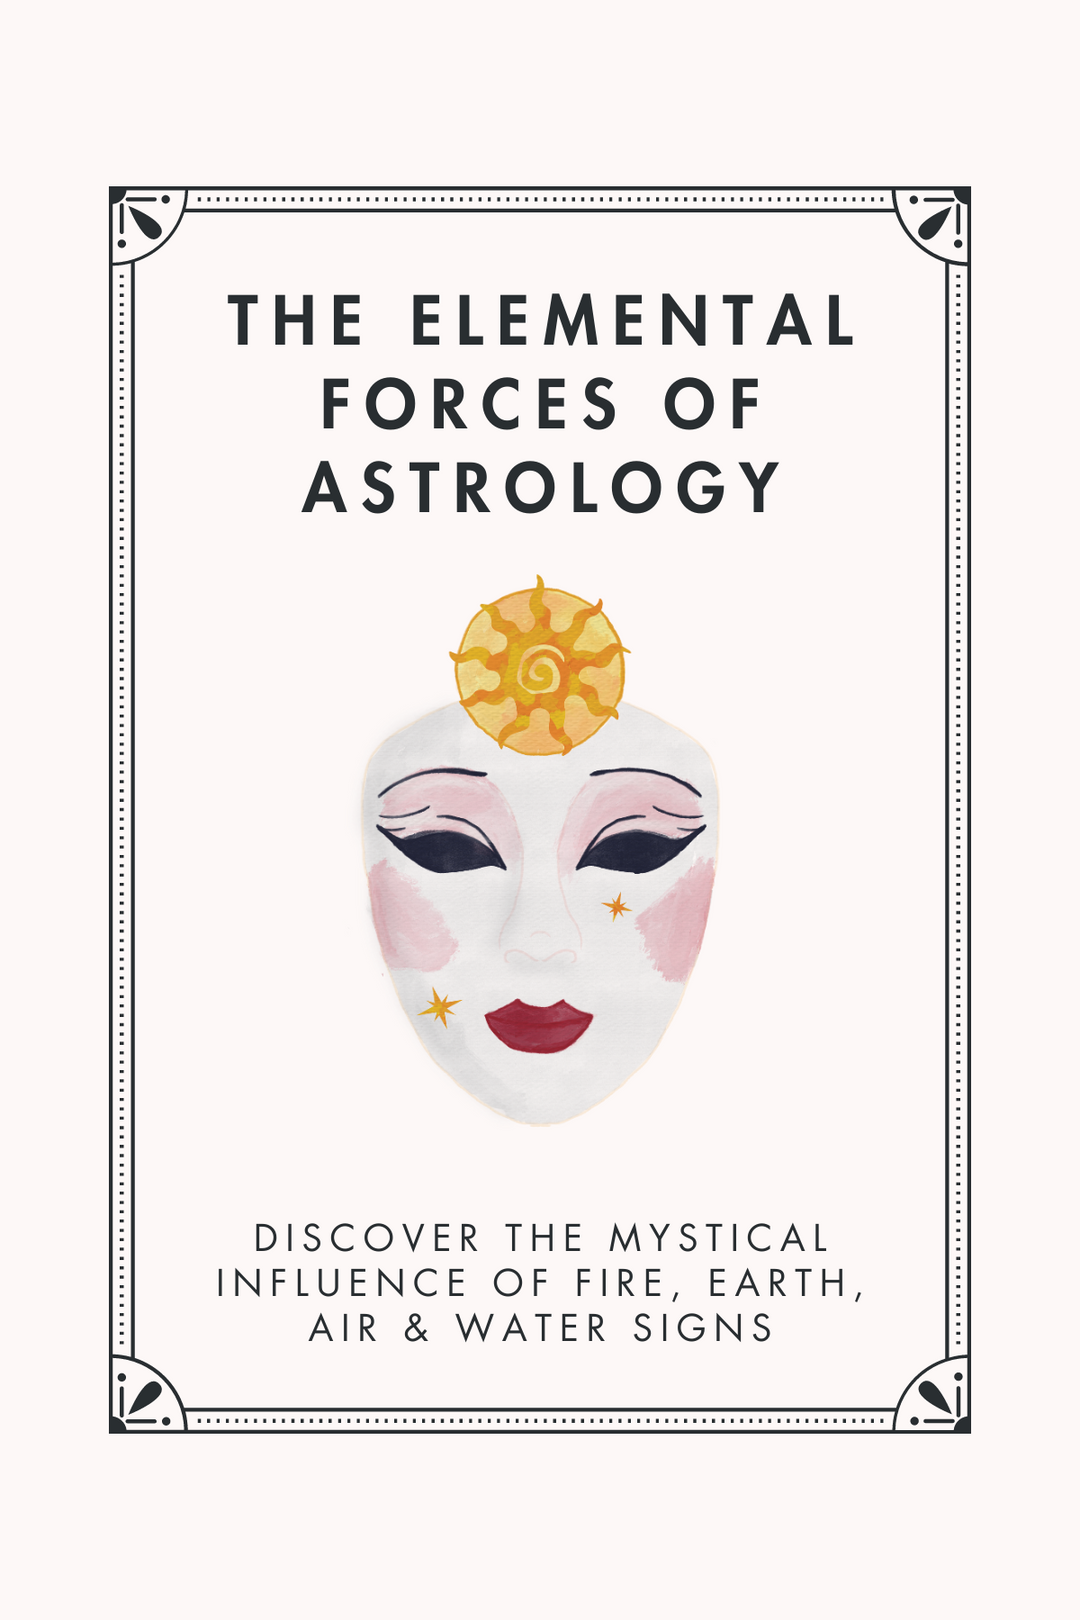 The Elemental Forces of Astrology